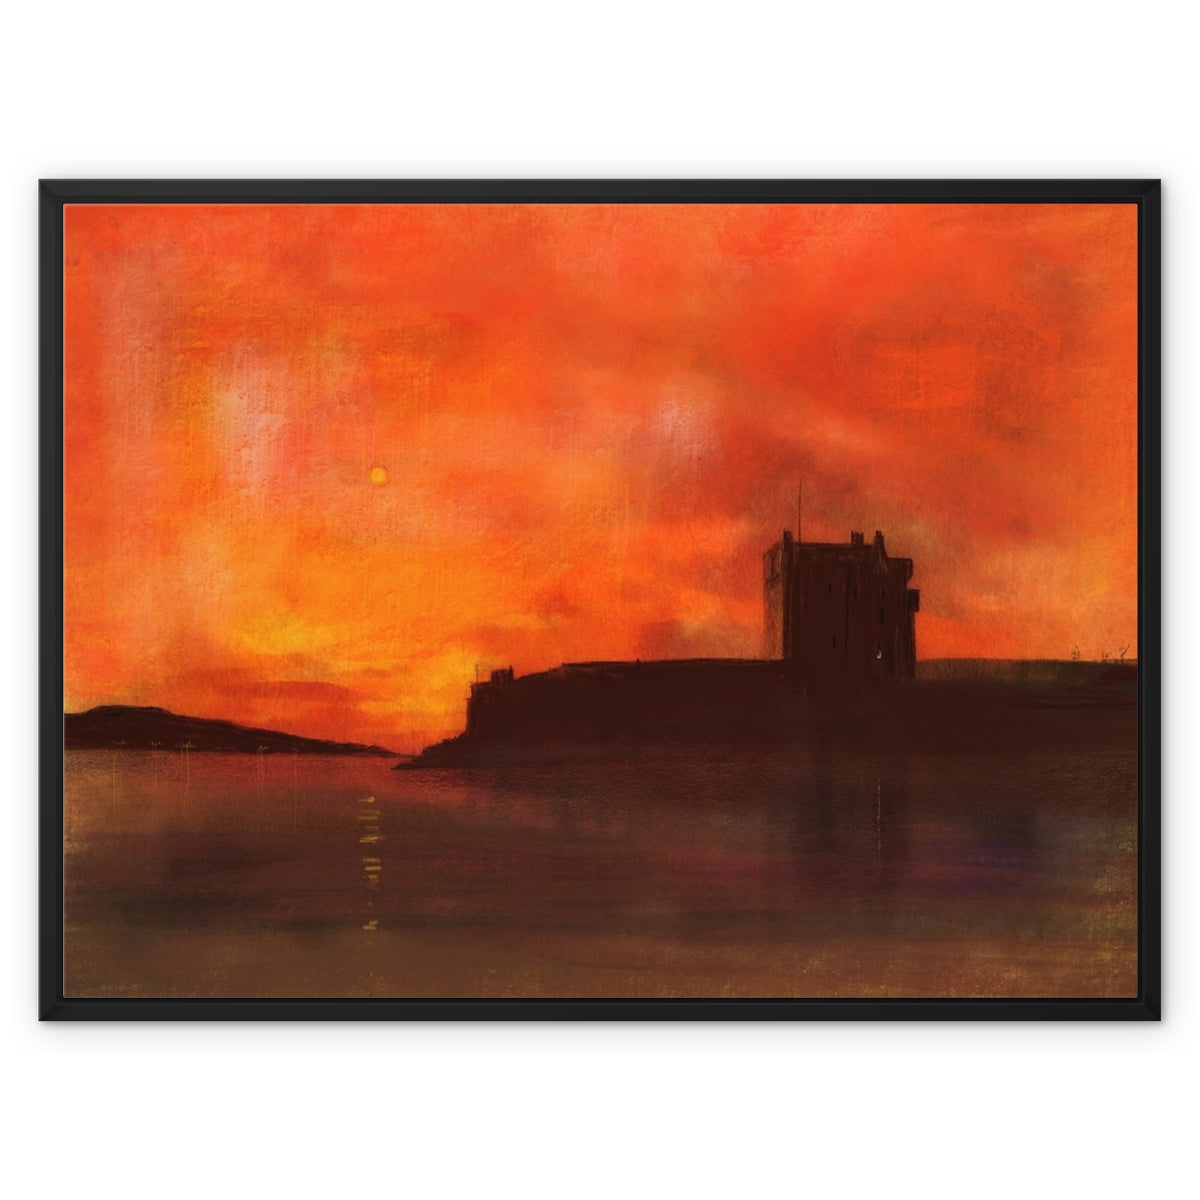 Broughty Castle Sunset Painting | Framed Canvas From Scotland-Floating Framed Canvas Prints-Scottish Castles Art Gallery-32"x24"-Black Frame-Paintings, Prints, Homeware, Art Gifts From Scotland By Scottish Artist Kevin Hunter